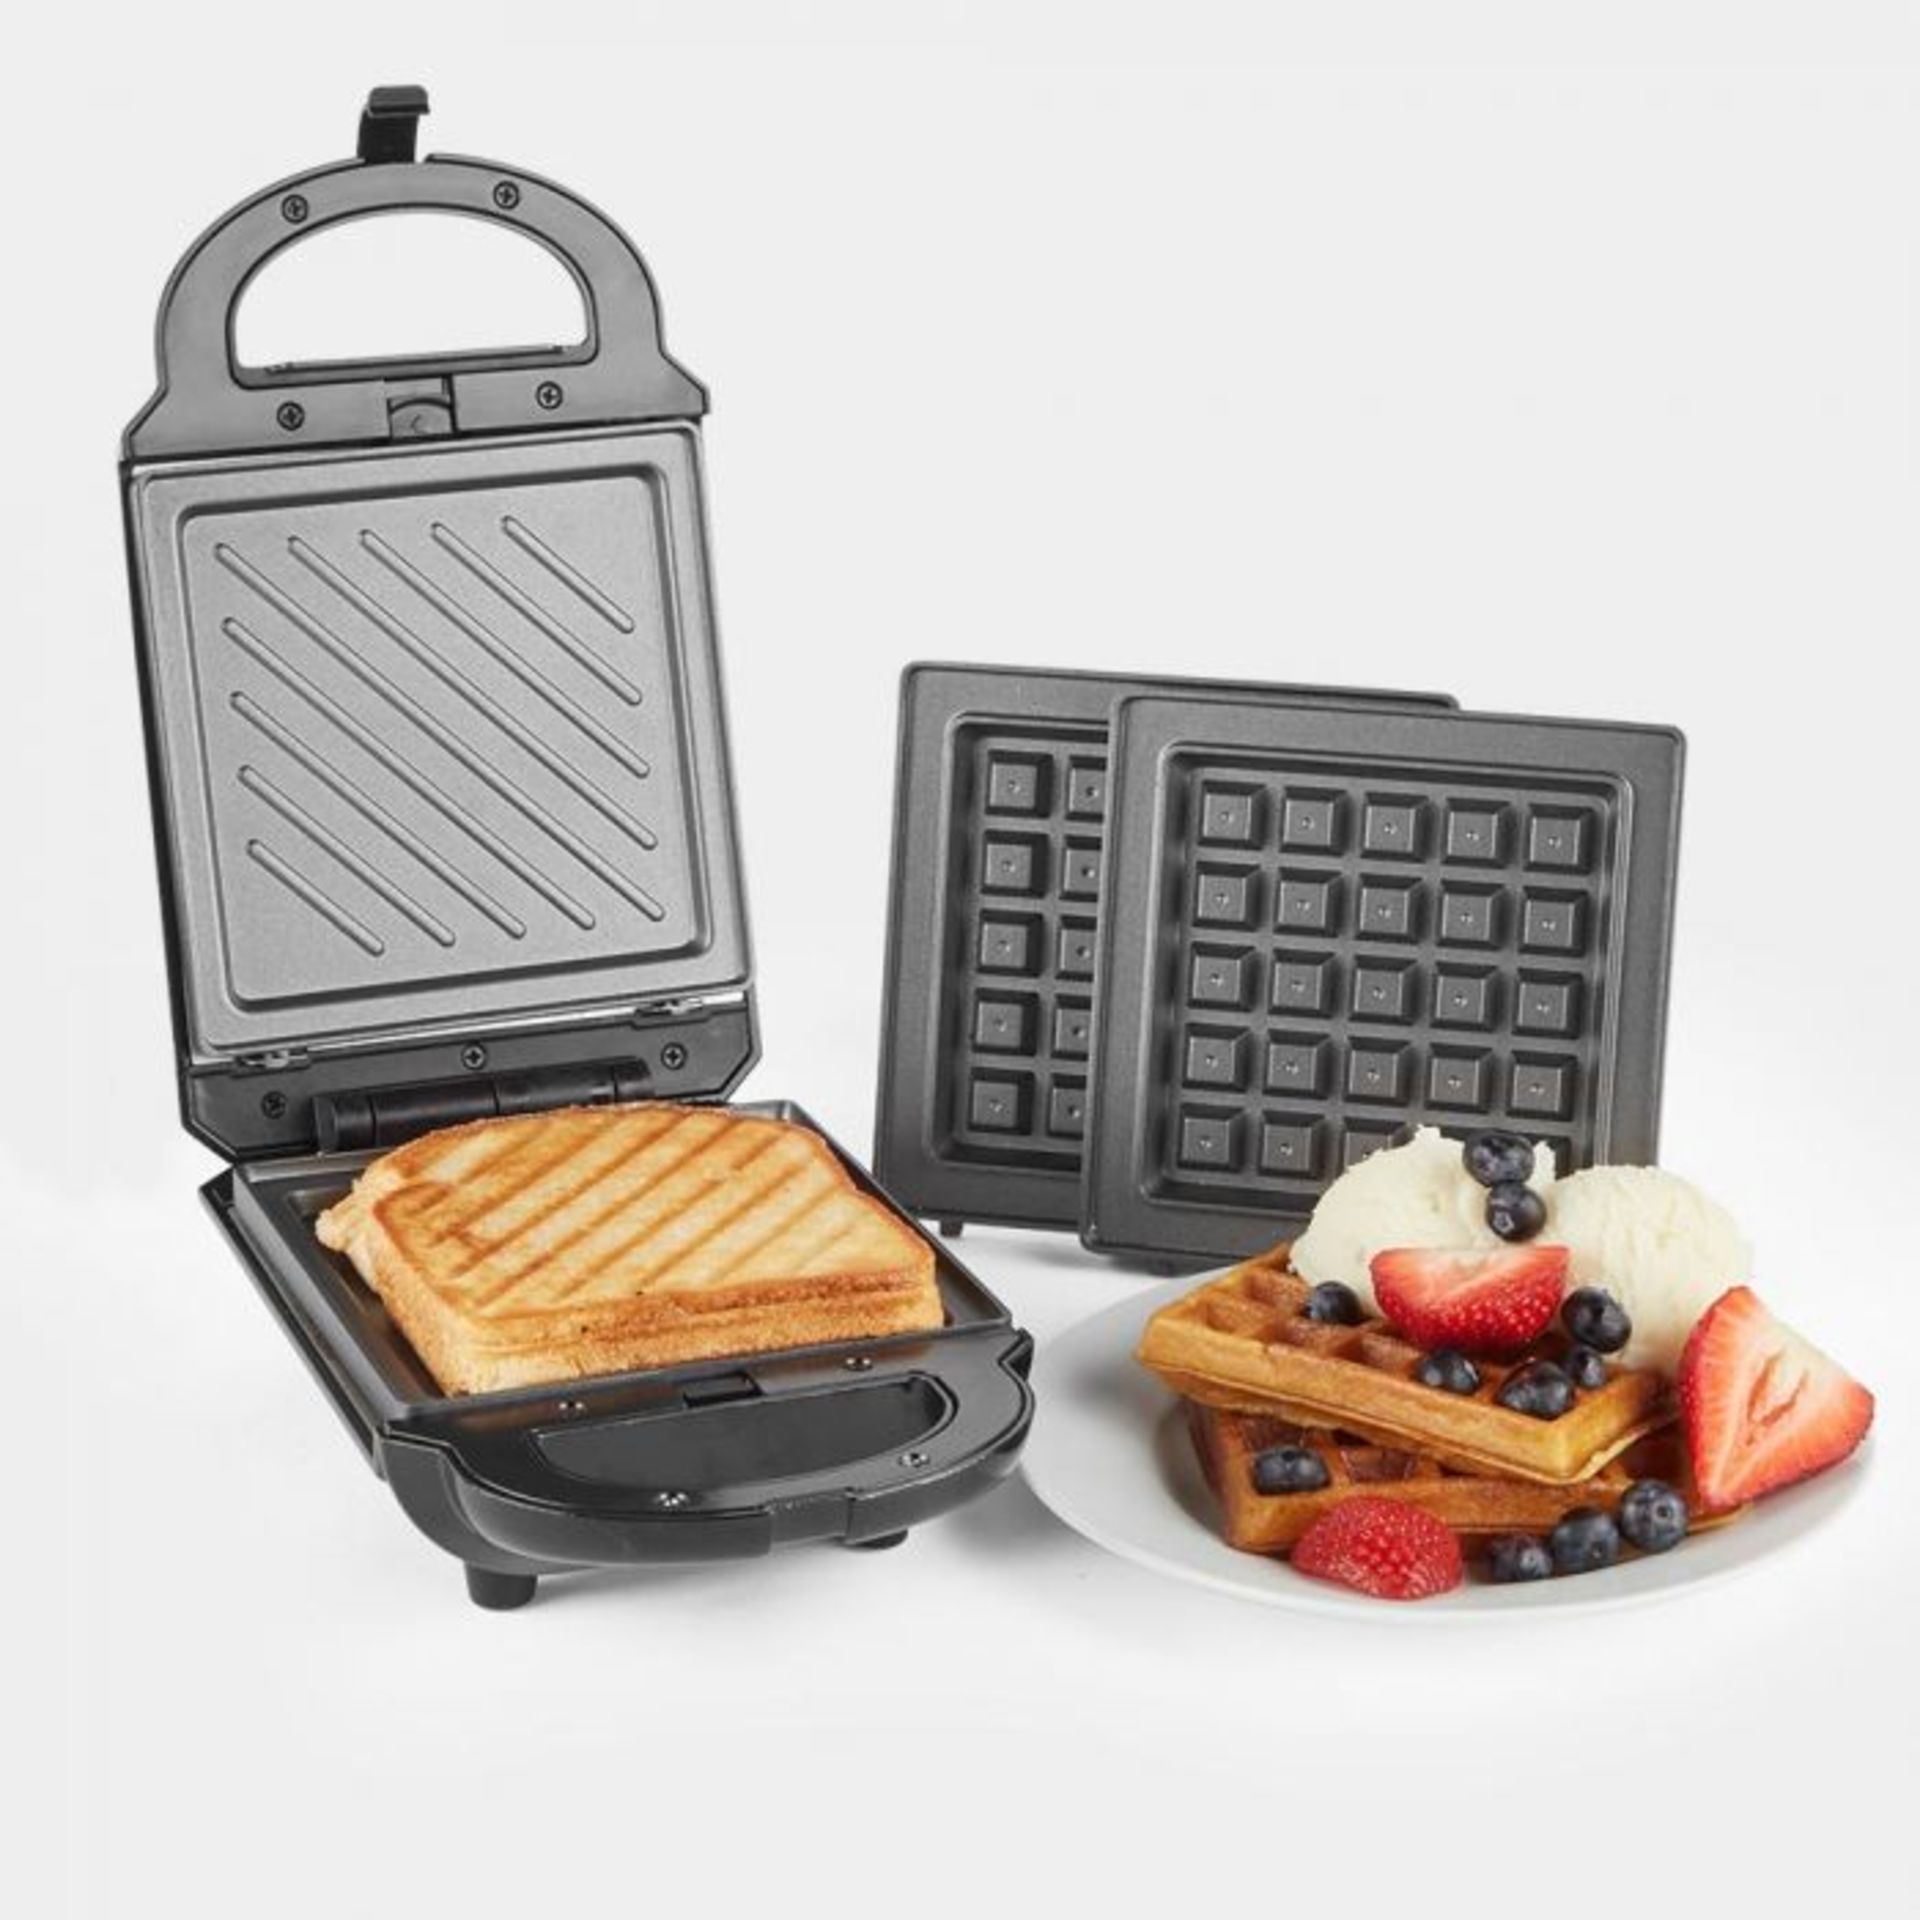 (S70) 460W 2 in 1 Snack Maker Make toasted sandwiches or waffles with this handy 2 in 1 snack ... - Image 2 of 5